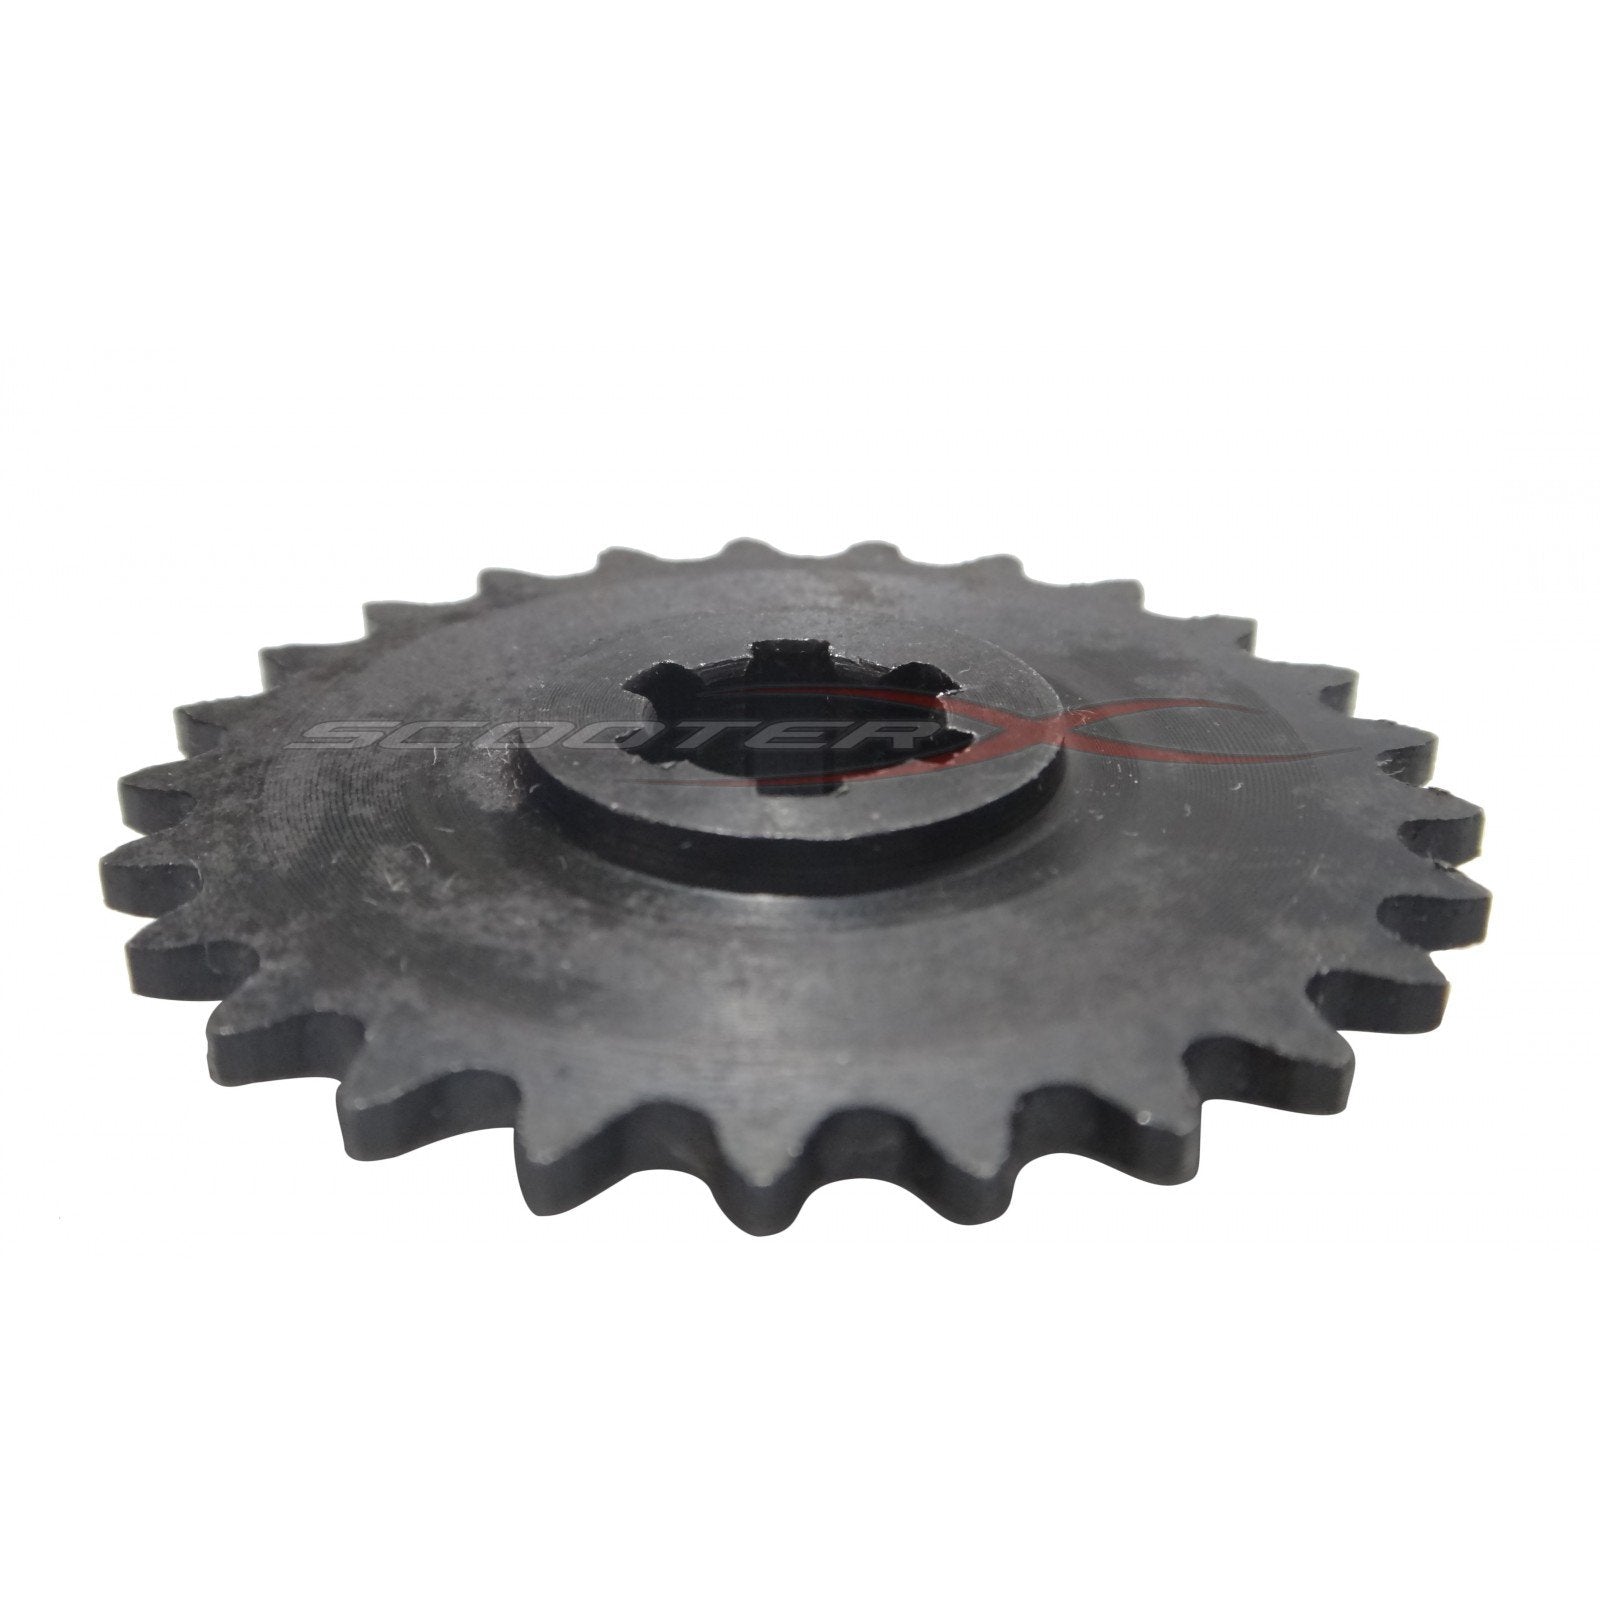 ScooterX TRANSMISSION SPROCKET 25H 25 TOOTH For Dirt Dog Gas Scooter